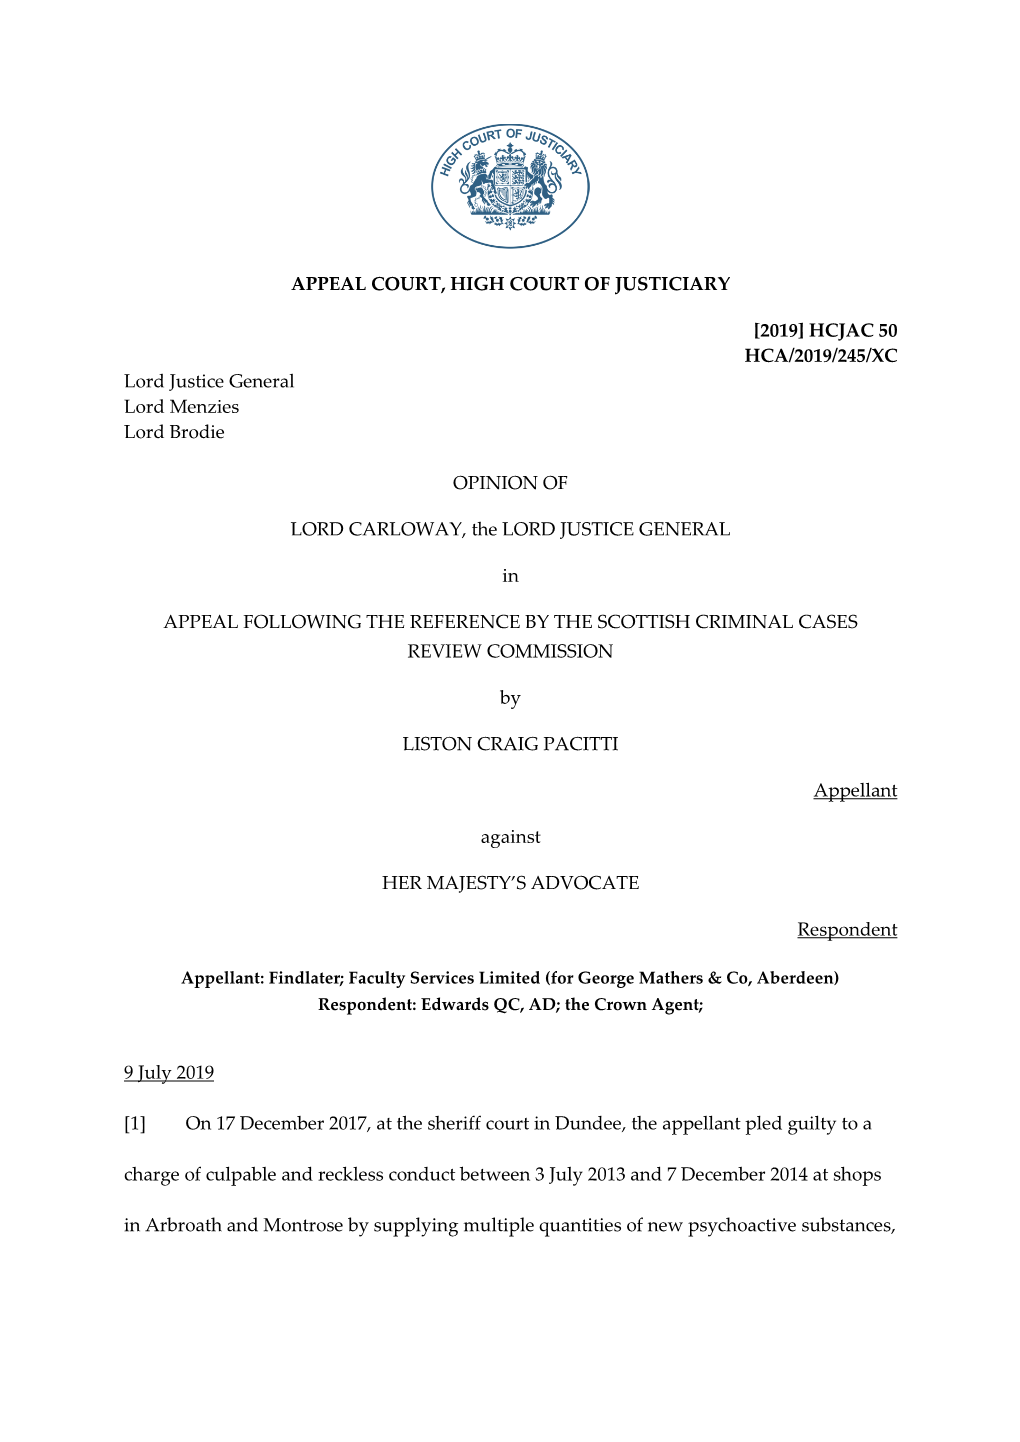 Appeal Court, High Court of Justiciary [2019] Hcjac 50